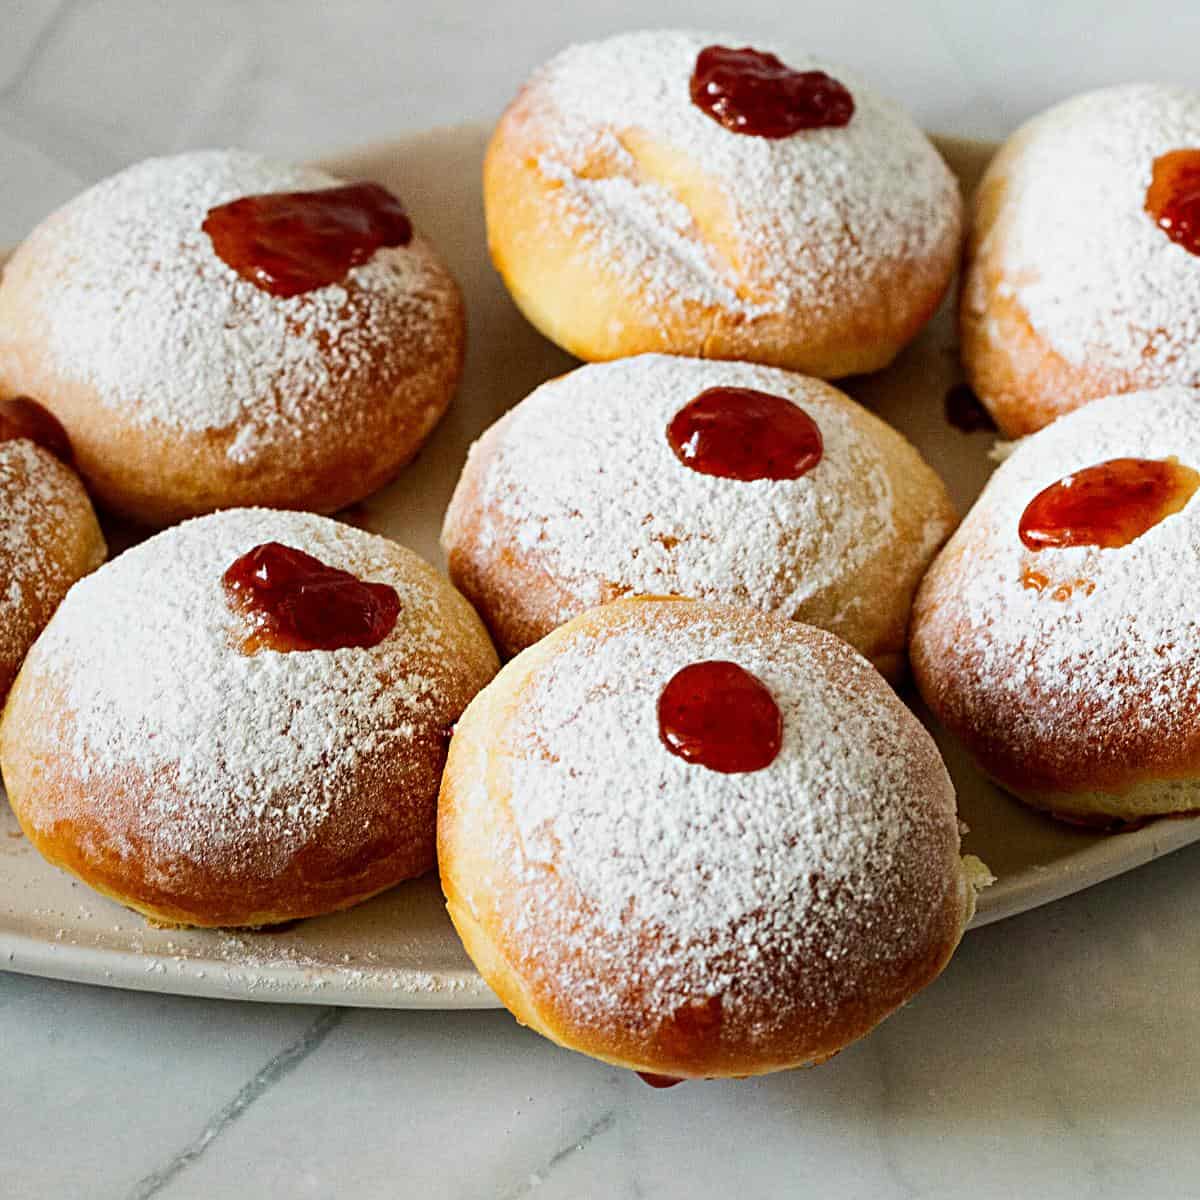 Jam donuts on a platter.